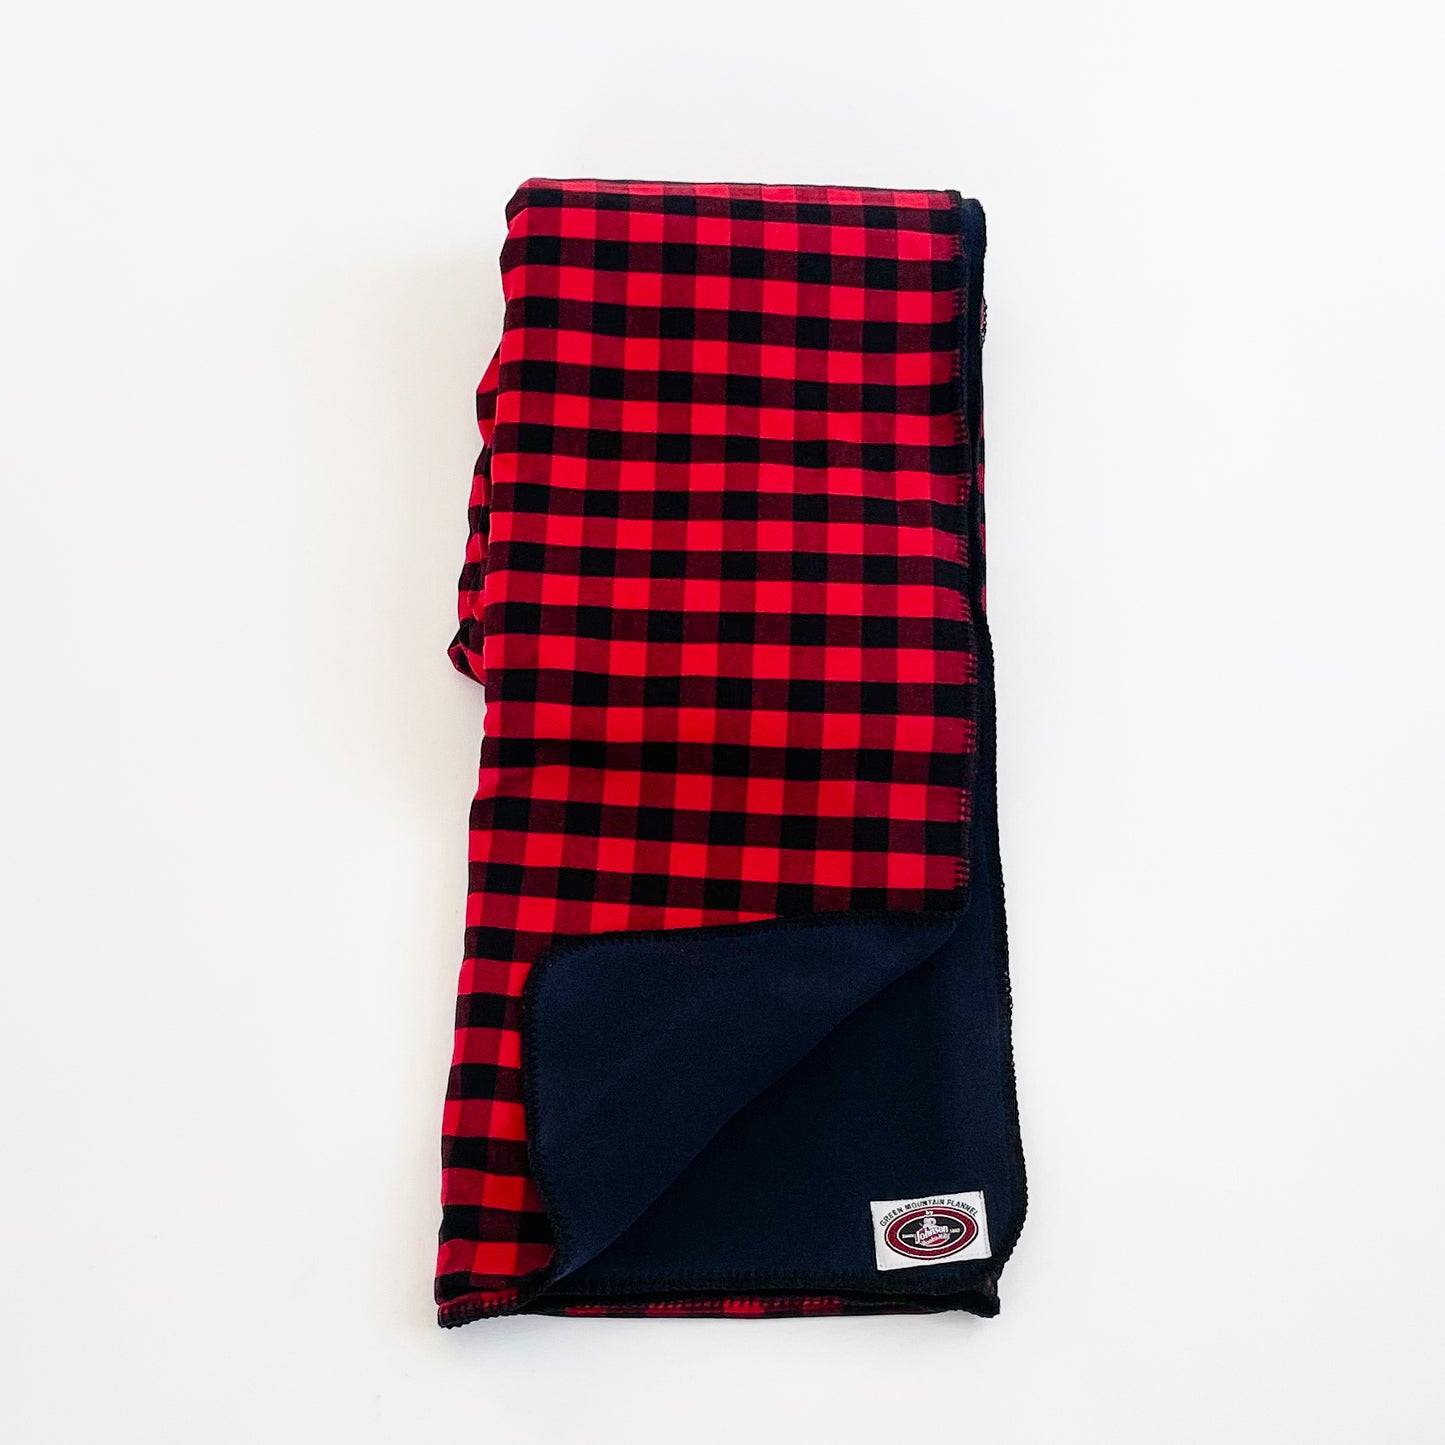 Green Mountain Flannel Throw Red & Black Buffalo squares with black fleece lining open corner view